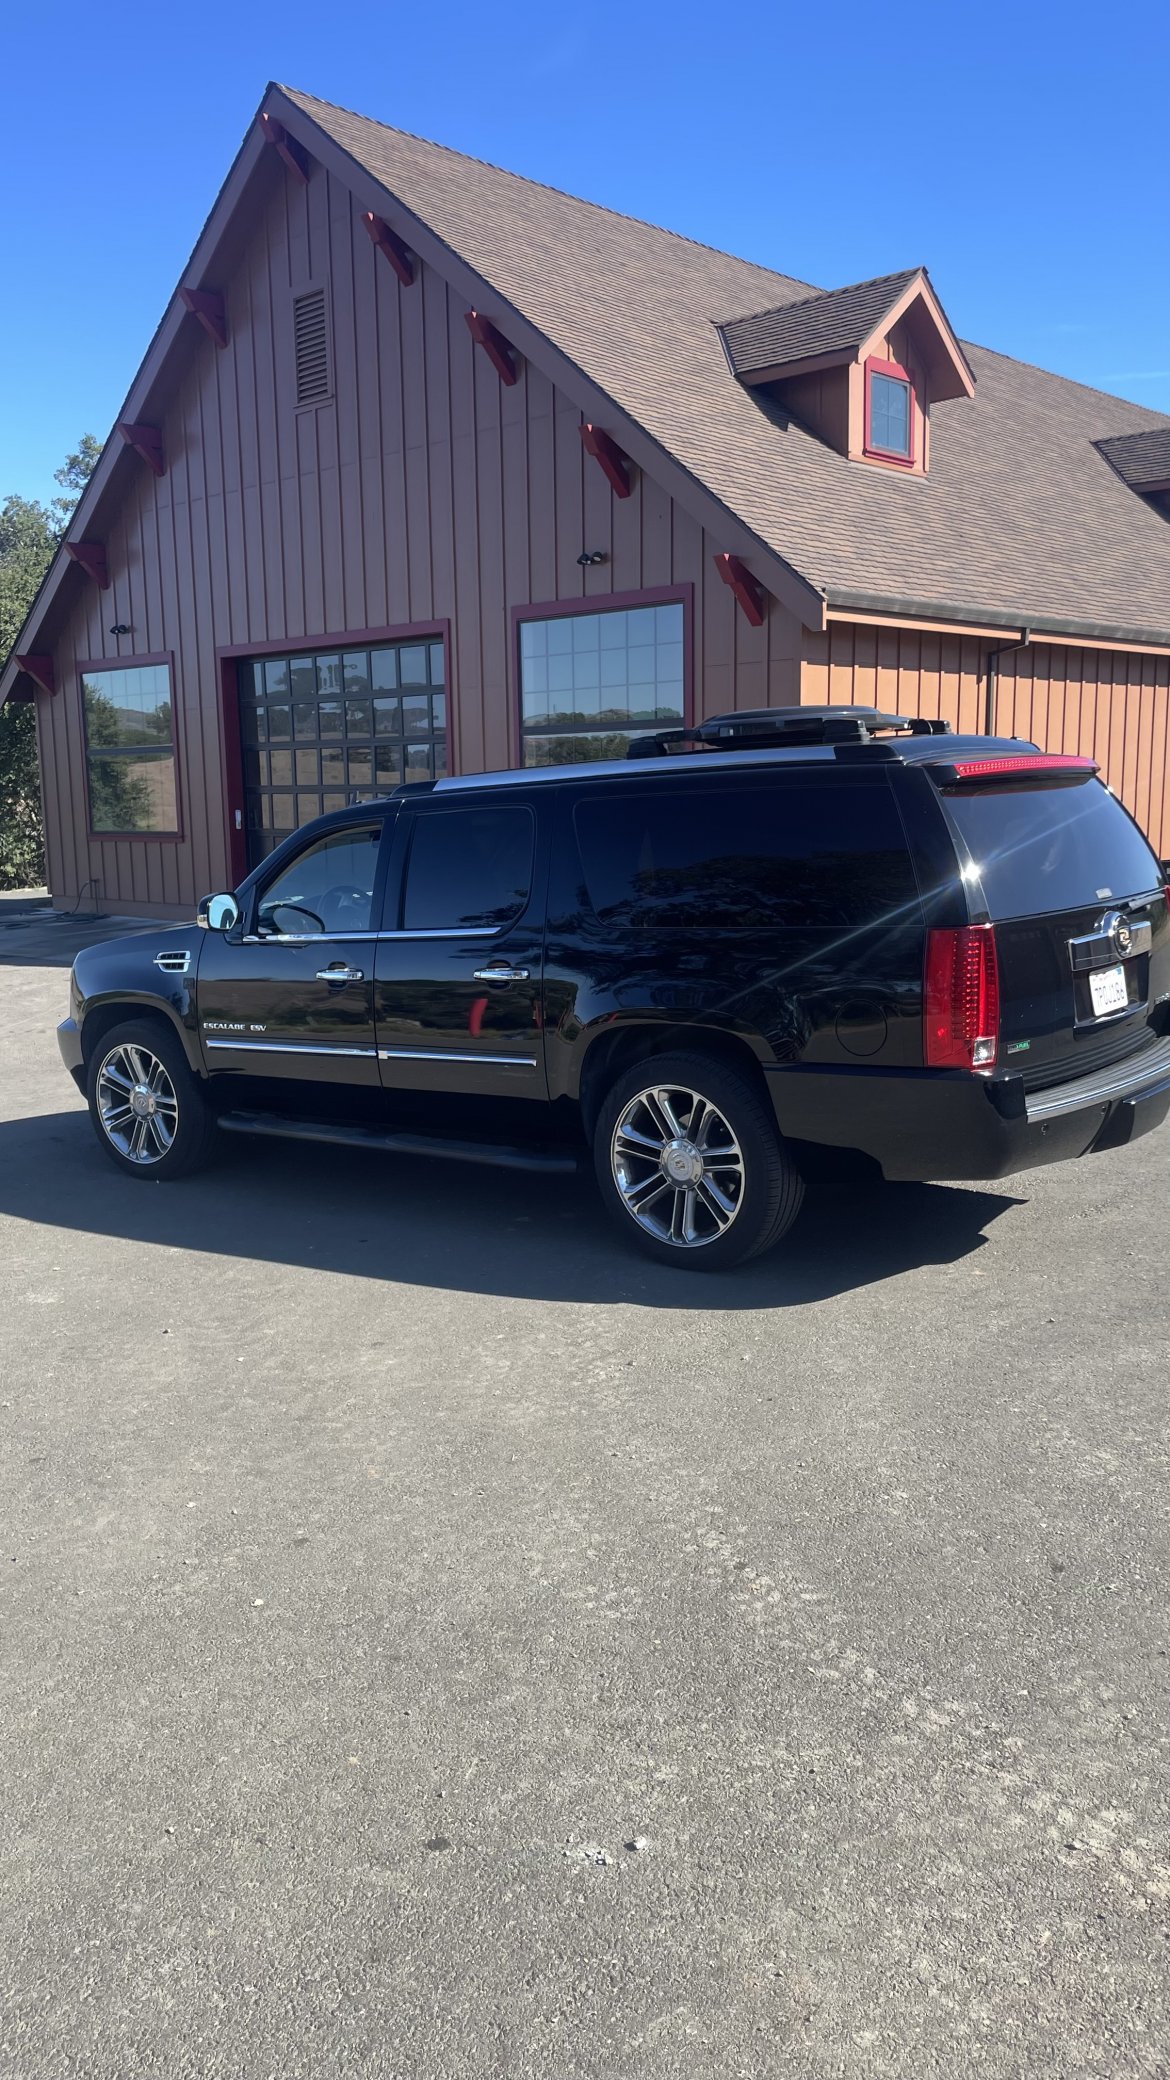 CEO SUV Mobile Office for sale: 2012 Chevrolet Escalade